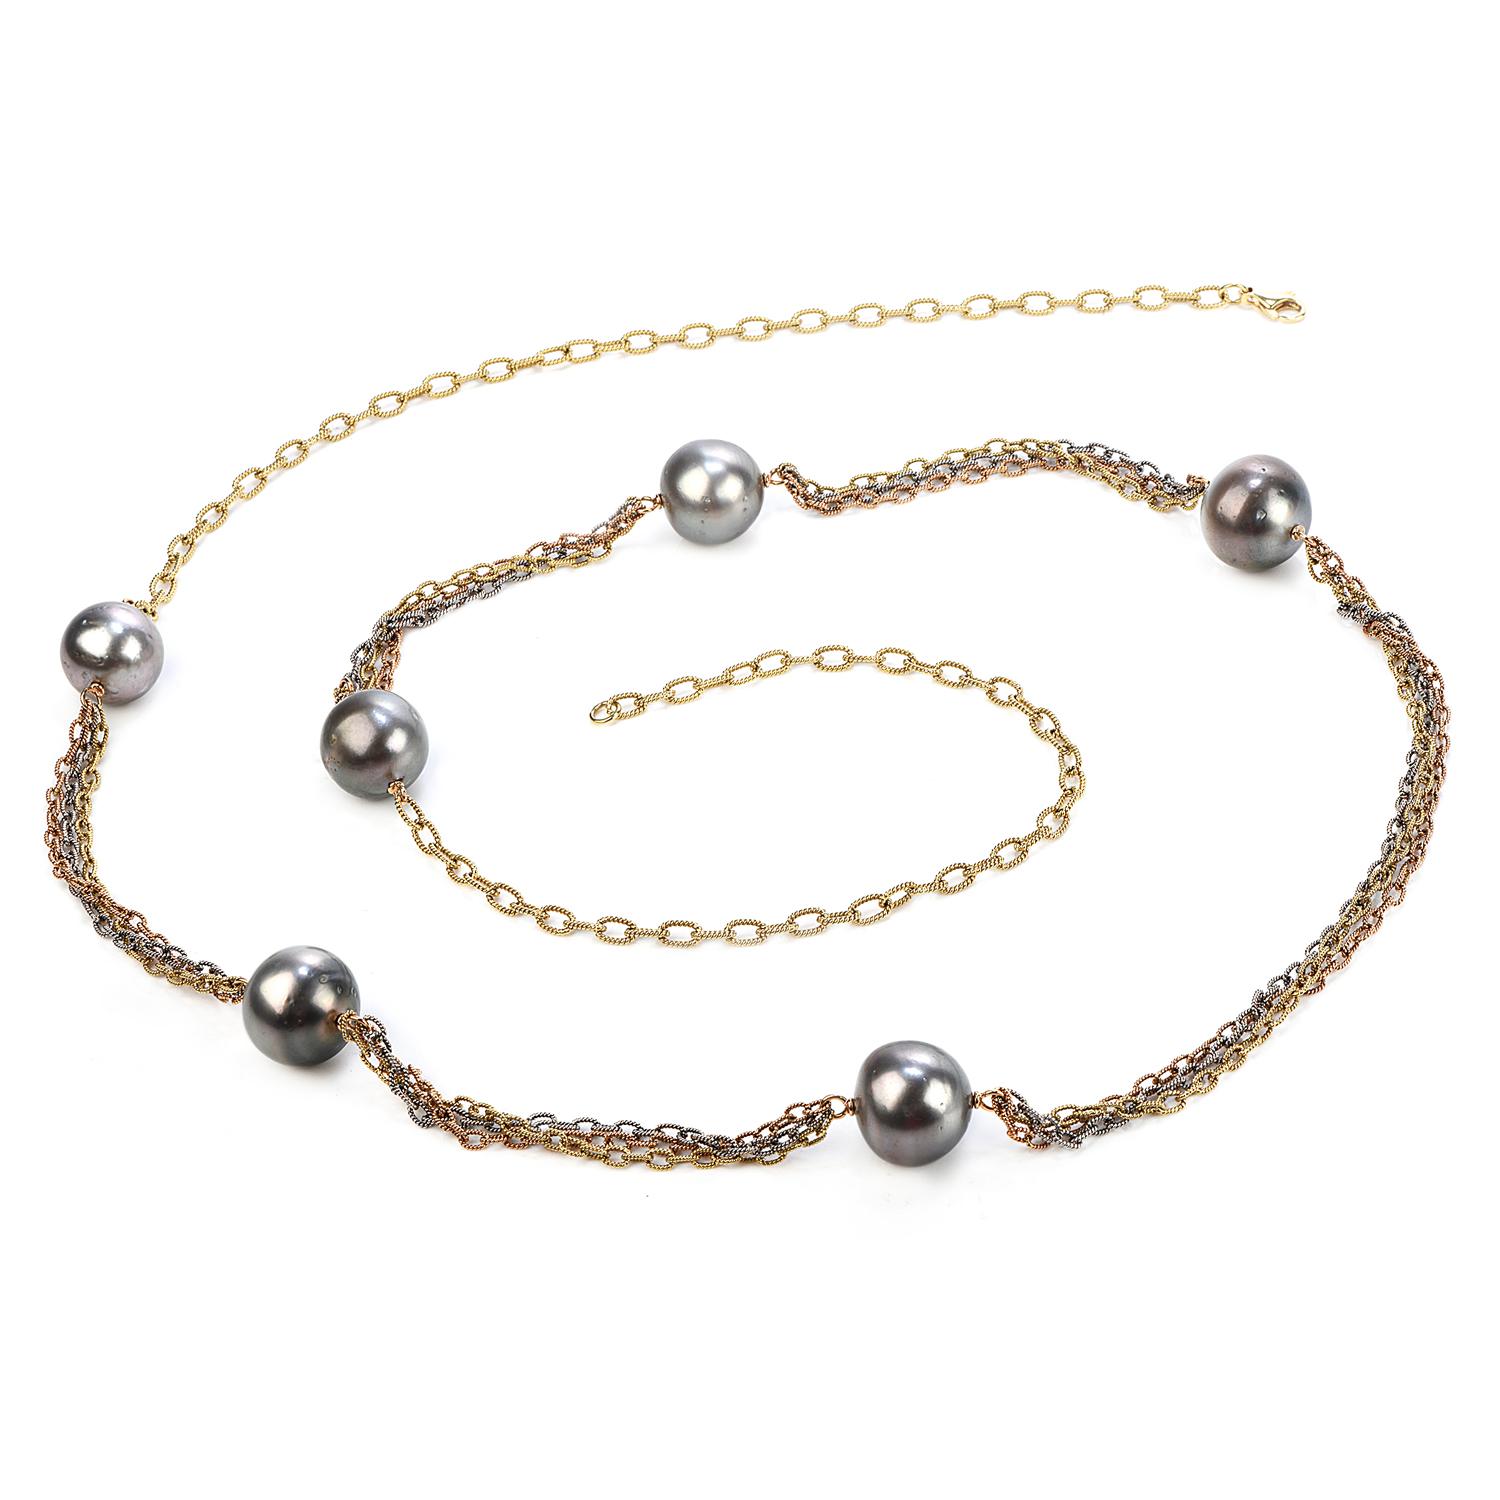 Large looking silvertone south sea pearls necklace, in a three-tone multi-chain design. 

Crafted in solid 18K yellow, white & rose gold links, this piece is formed by (6) gray color 15 mm South Sea Pearls, with natural blemishes & medium luster. 